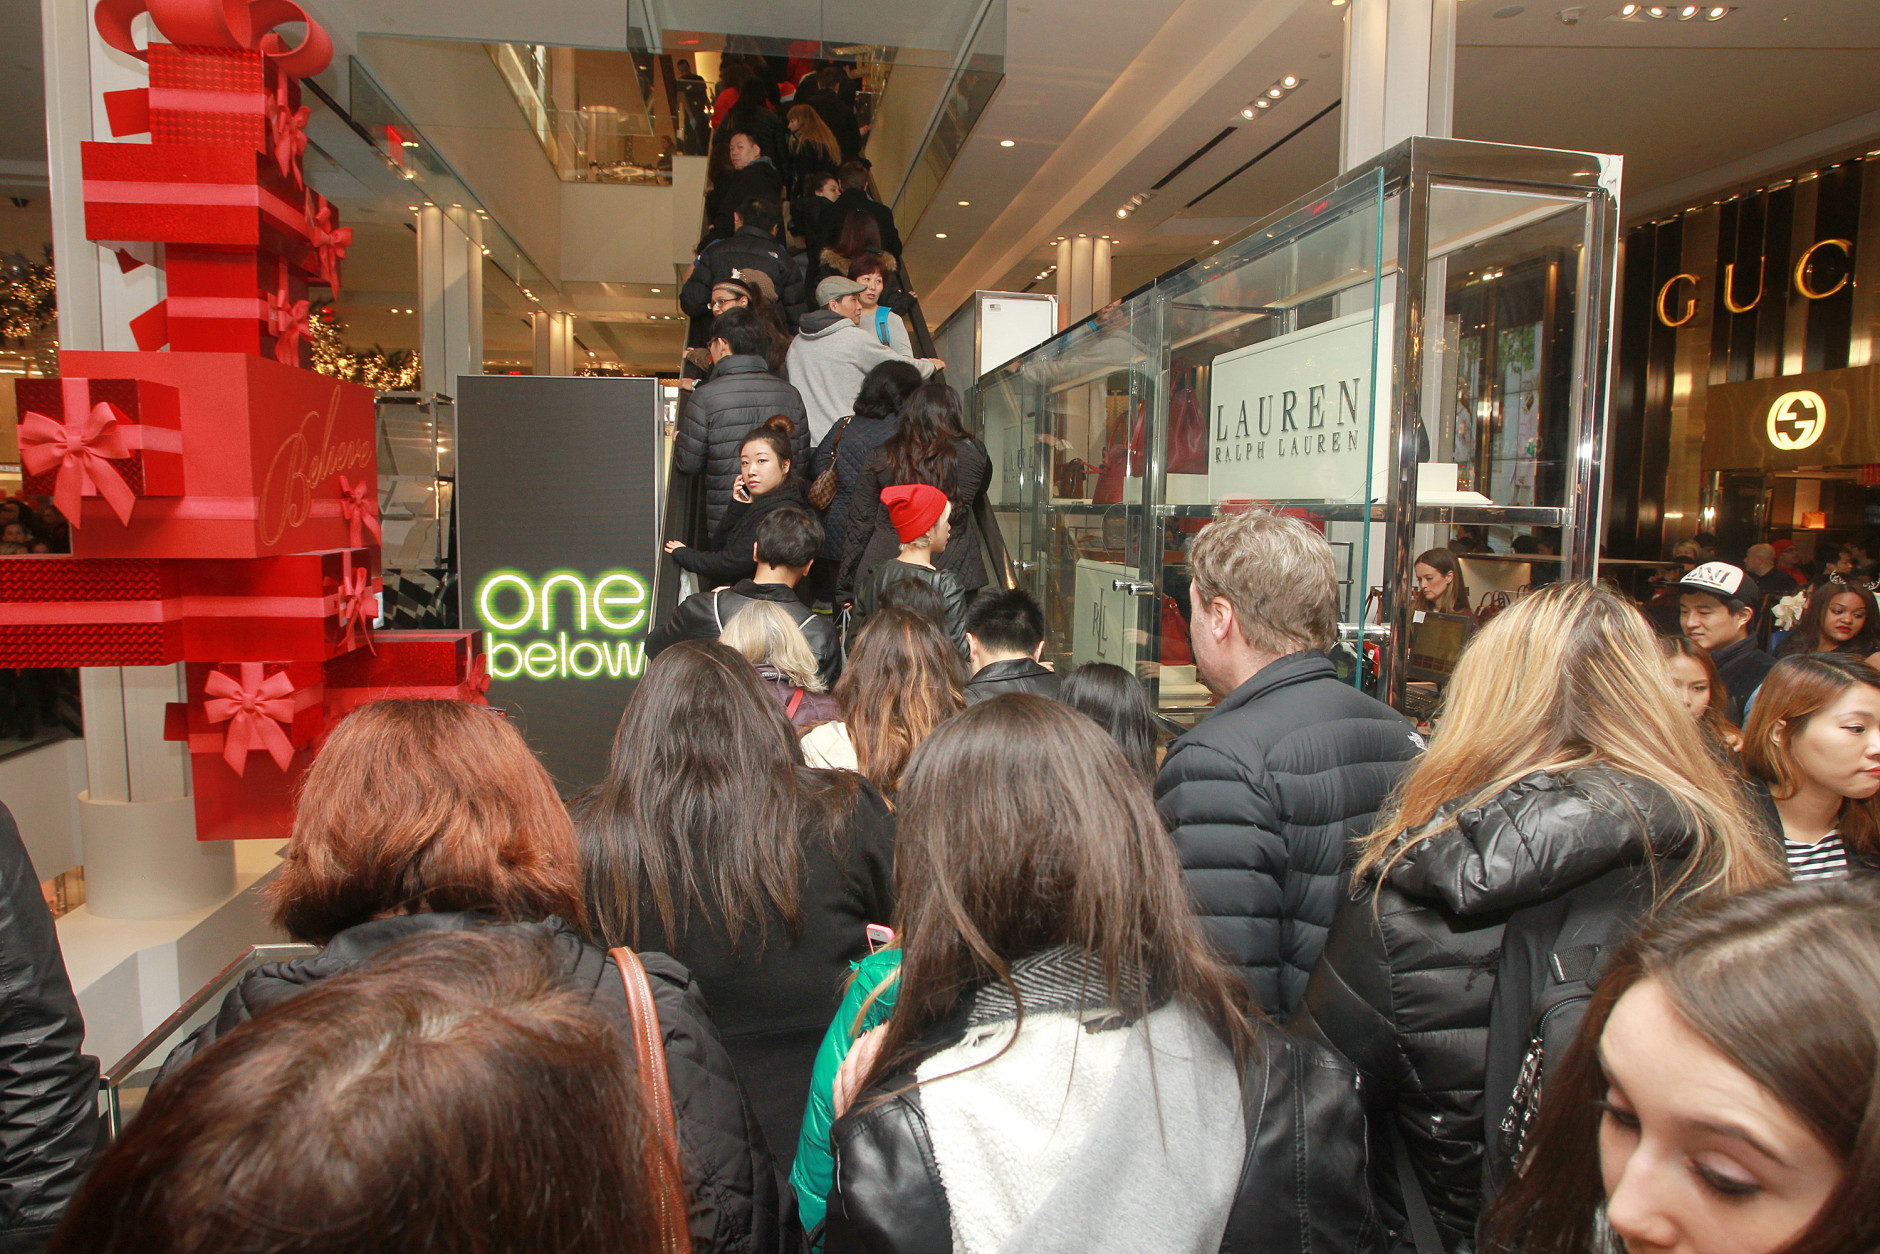 IMAGE DISTRIBUTED FOR MACY'S - Eager shoppers pour into the Macy's Herald Square flagship store upon store opening for "Black Friday" 2015 on Thursday, Nov. 26, 2015 in New York. On Thanksgiving at 6pm, most Macys stores across the country opened its doors to thousands of early bird shoppers in search of sales, door buster deals and limited-time-offers. (Donald Traill/ AP Images for Macy's)